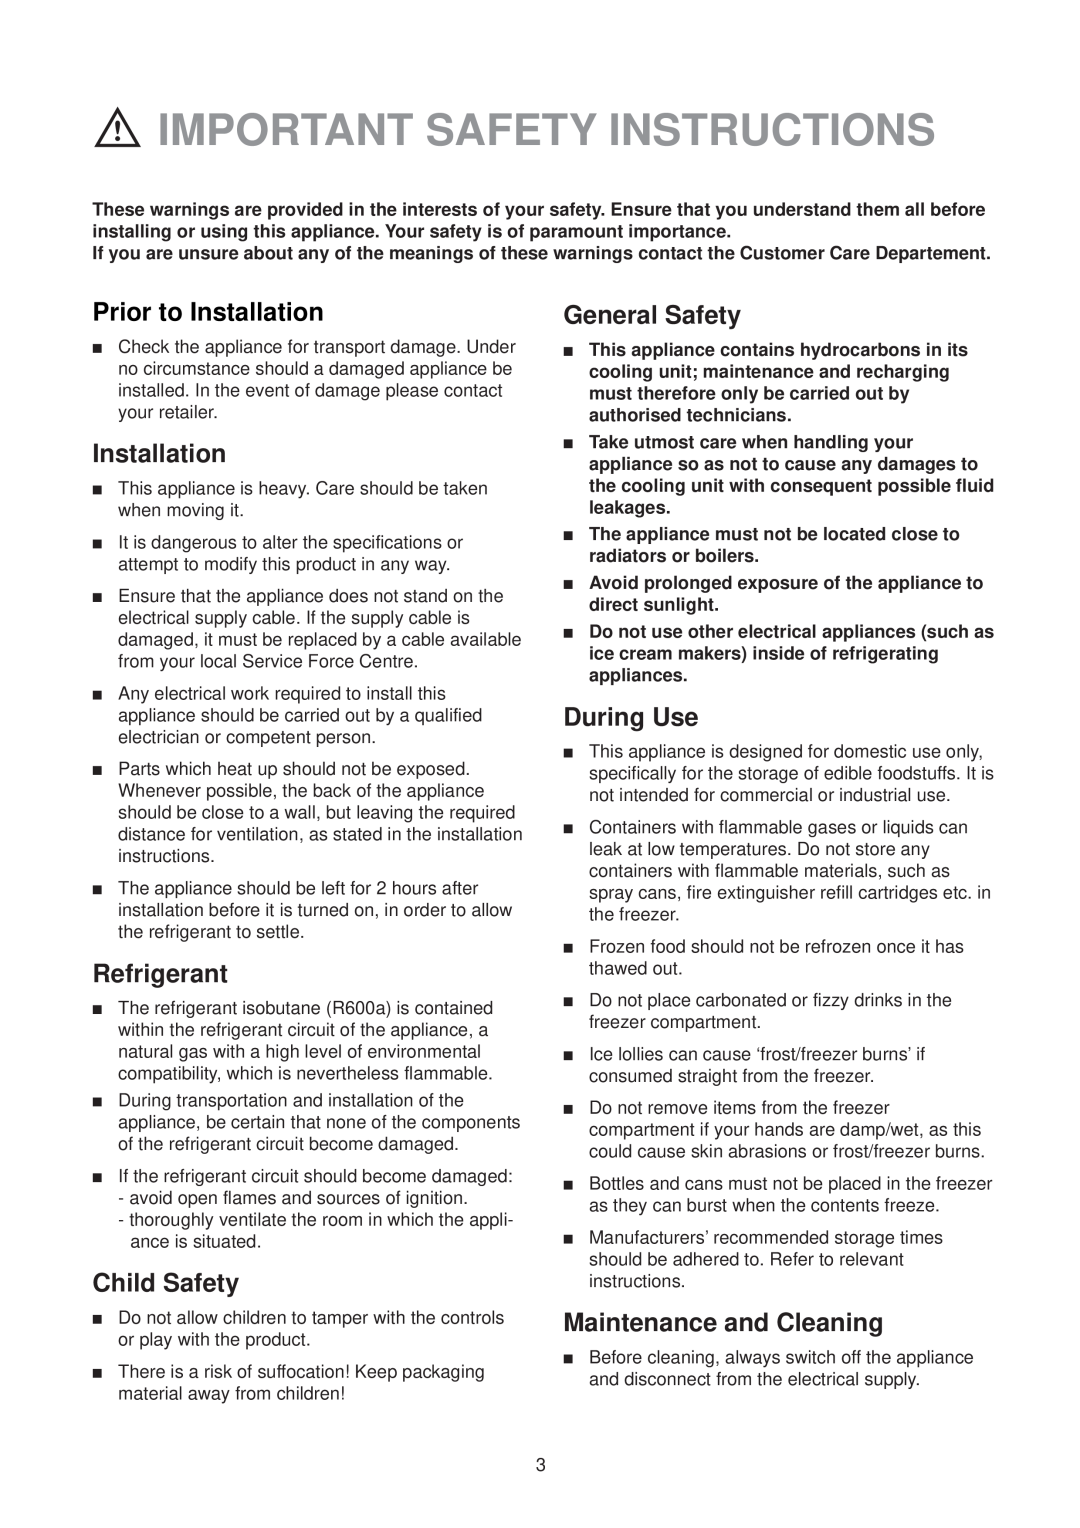 Zanussi ZVR 45 R manual Important Safety Instructions, Prior to Installation, Refrigerant, Child Safety, General Safety 